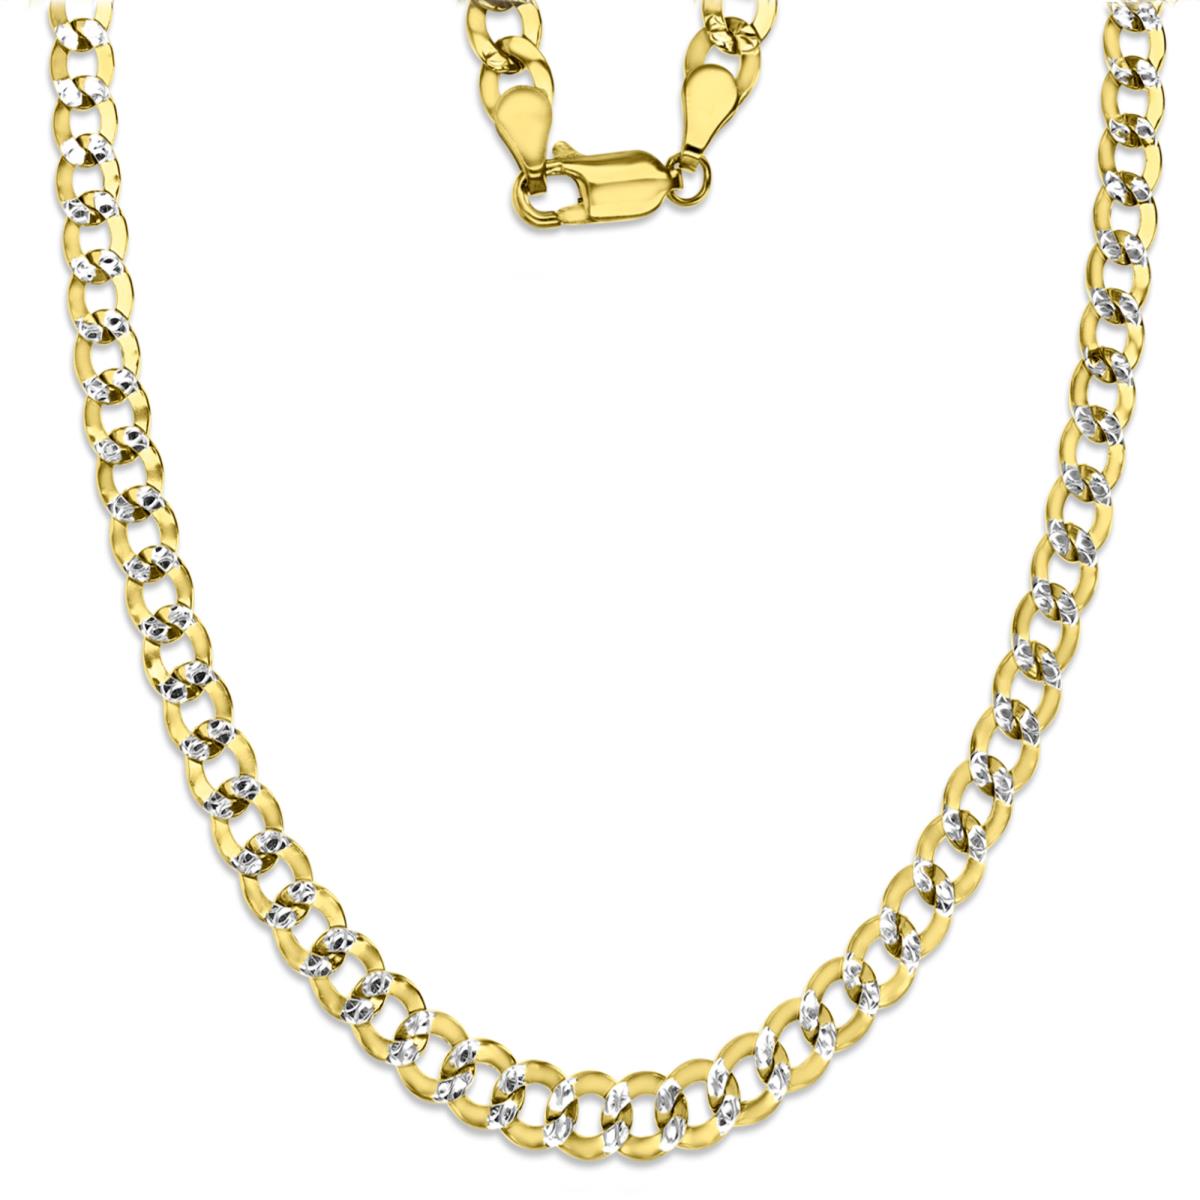 10K Two-Tone Gold 5.2mm 20" 120 Hollow Cuban Pave Chain